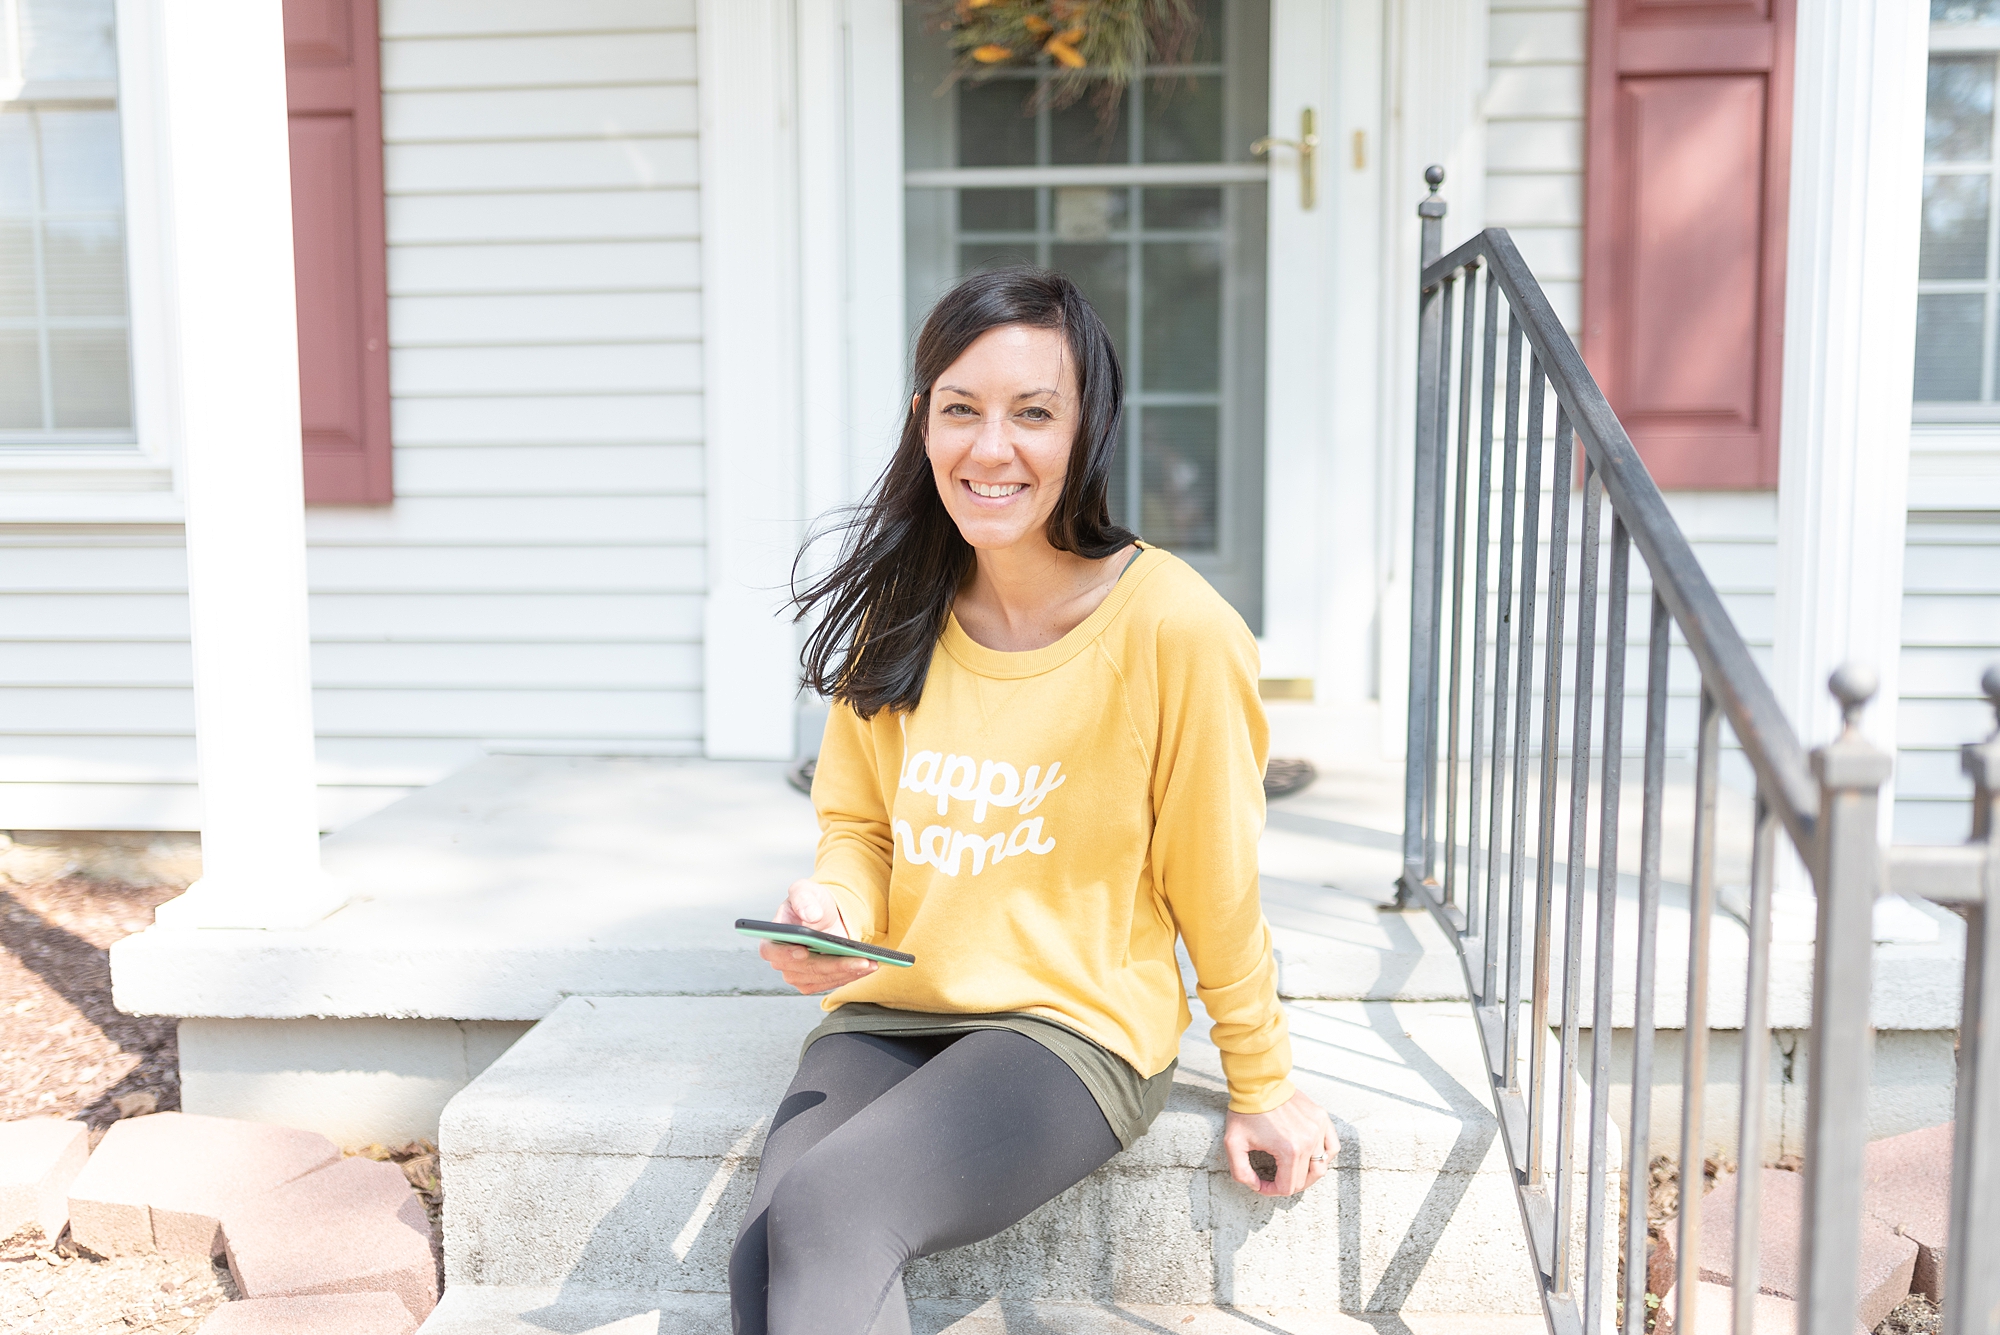 An Inside Look into a Nashville Health coach's life and business for her branding session with Dolly DeLong Photography